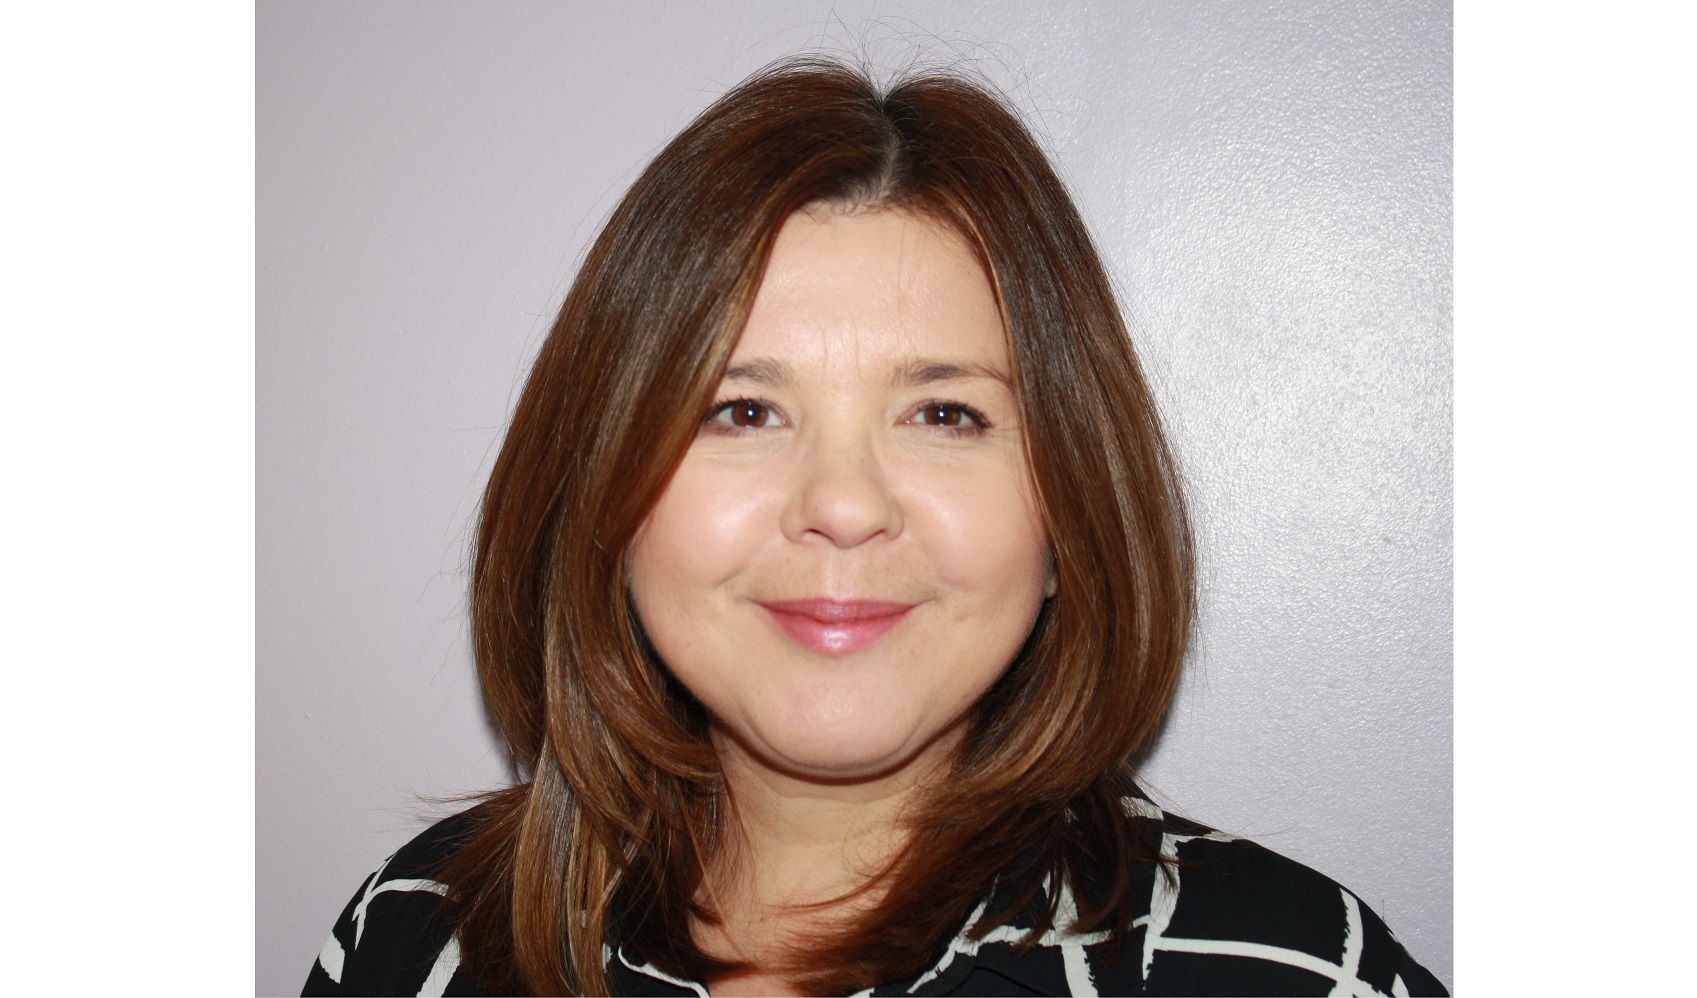 As Regional Manager, Natalie Dunleavy looks after all sales activities of Clark Europe in the United Kingdom and Ireland